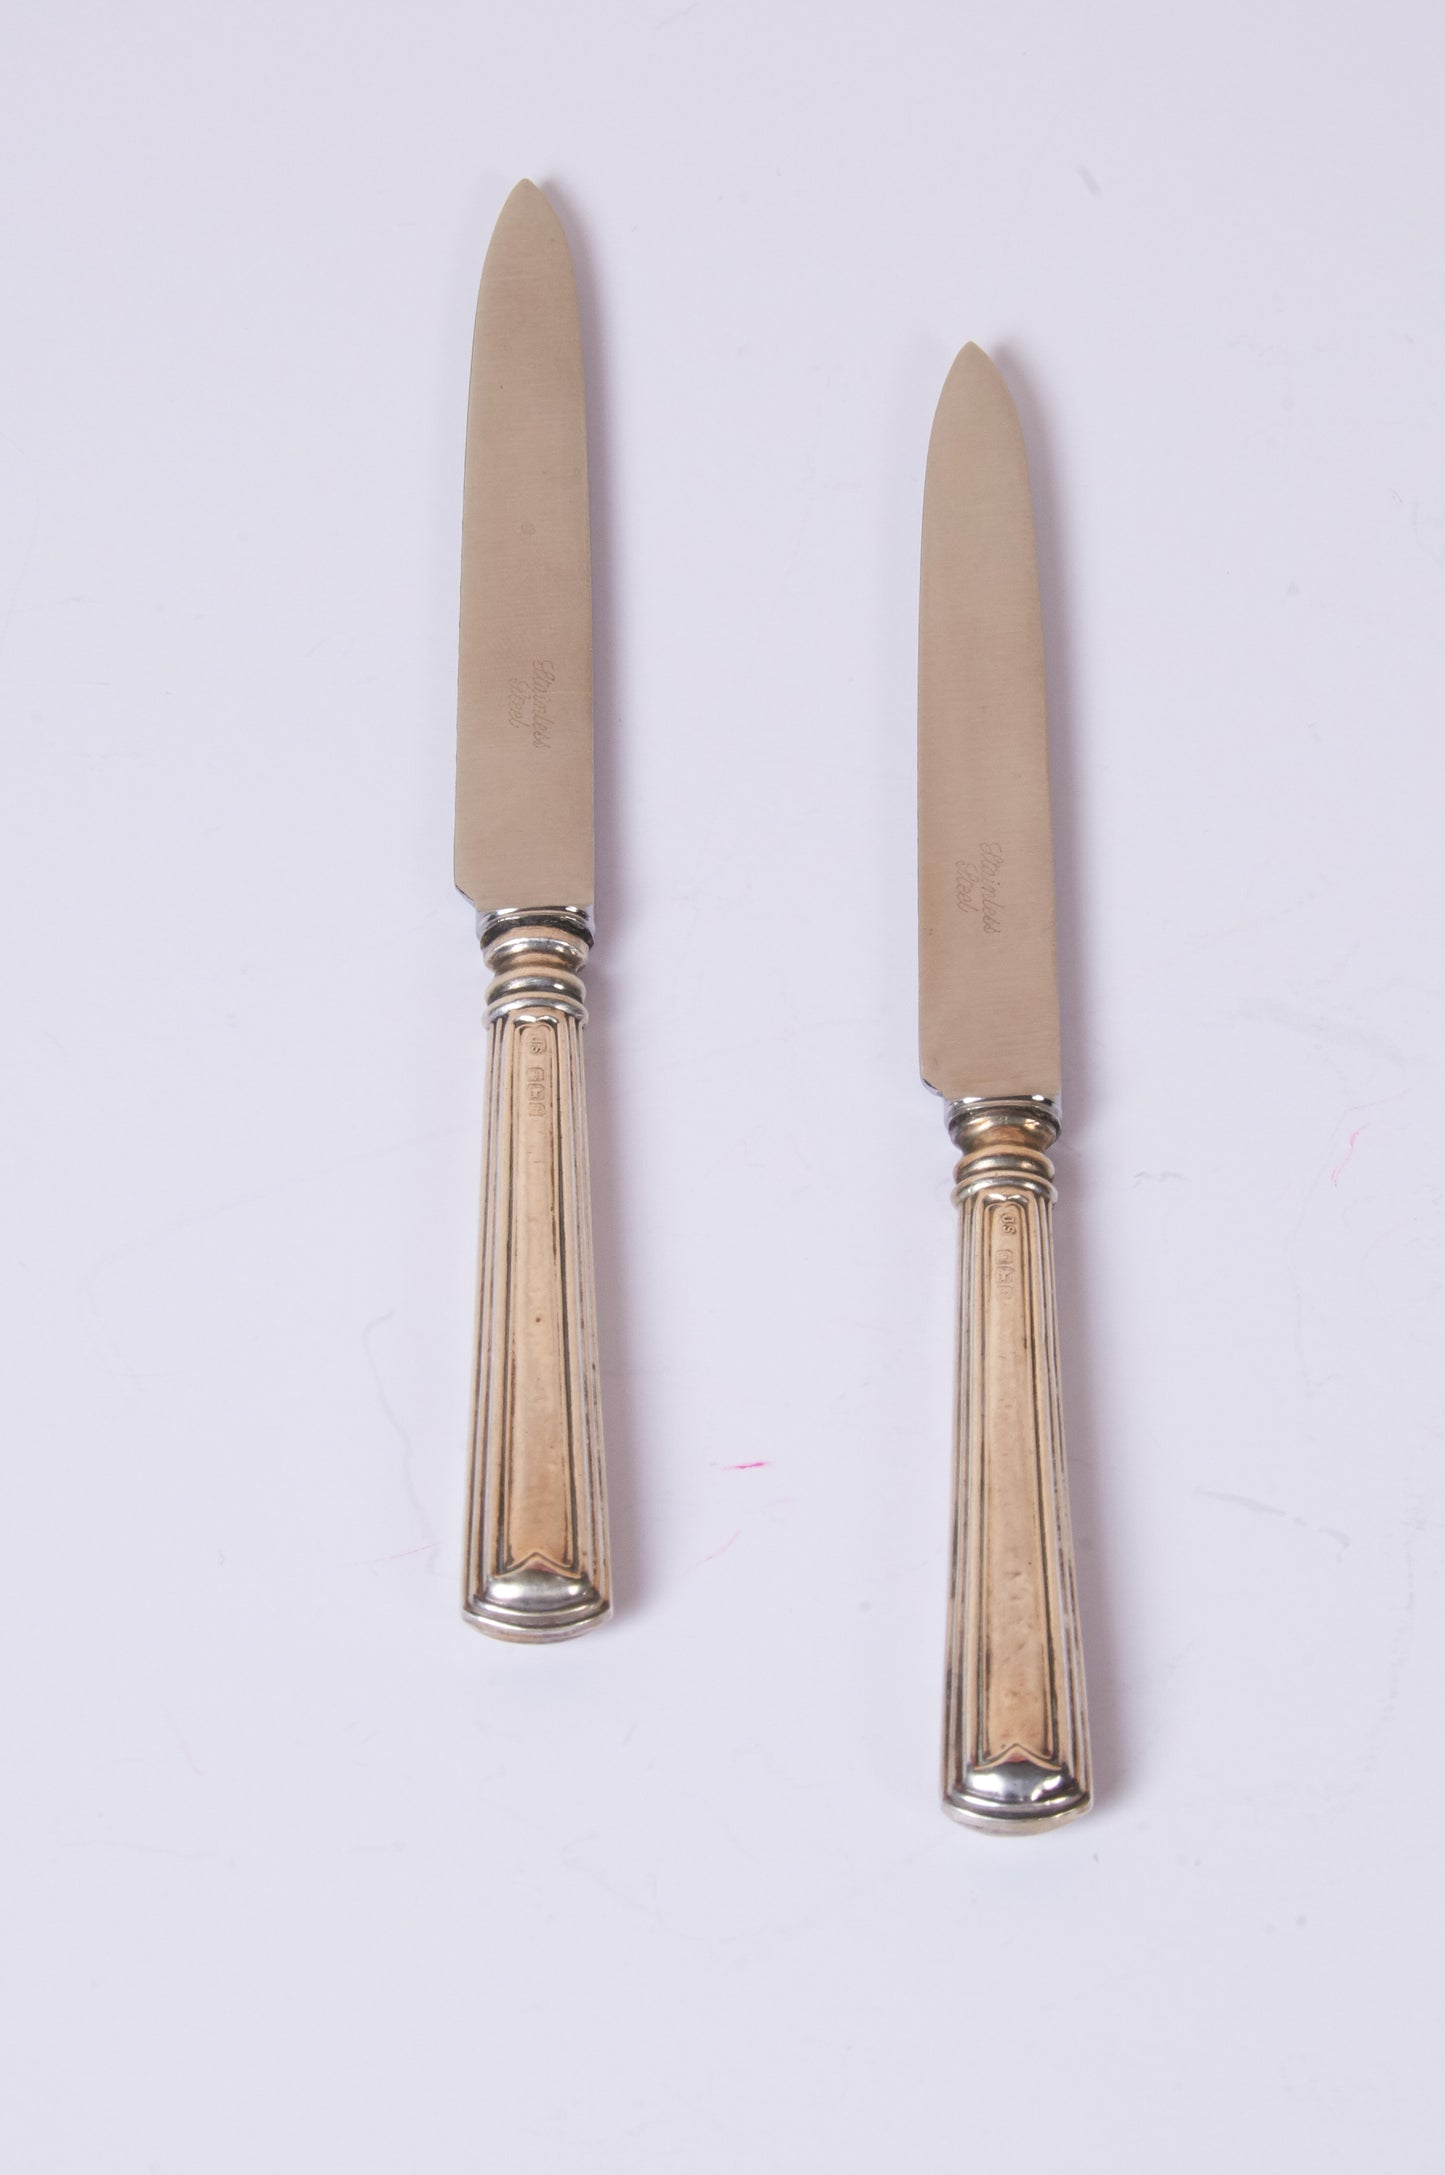 The Headhunter Avery - Deco Sterling silver handle fruit / cake knife